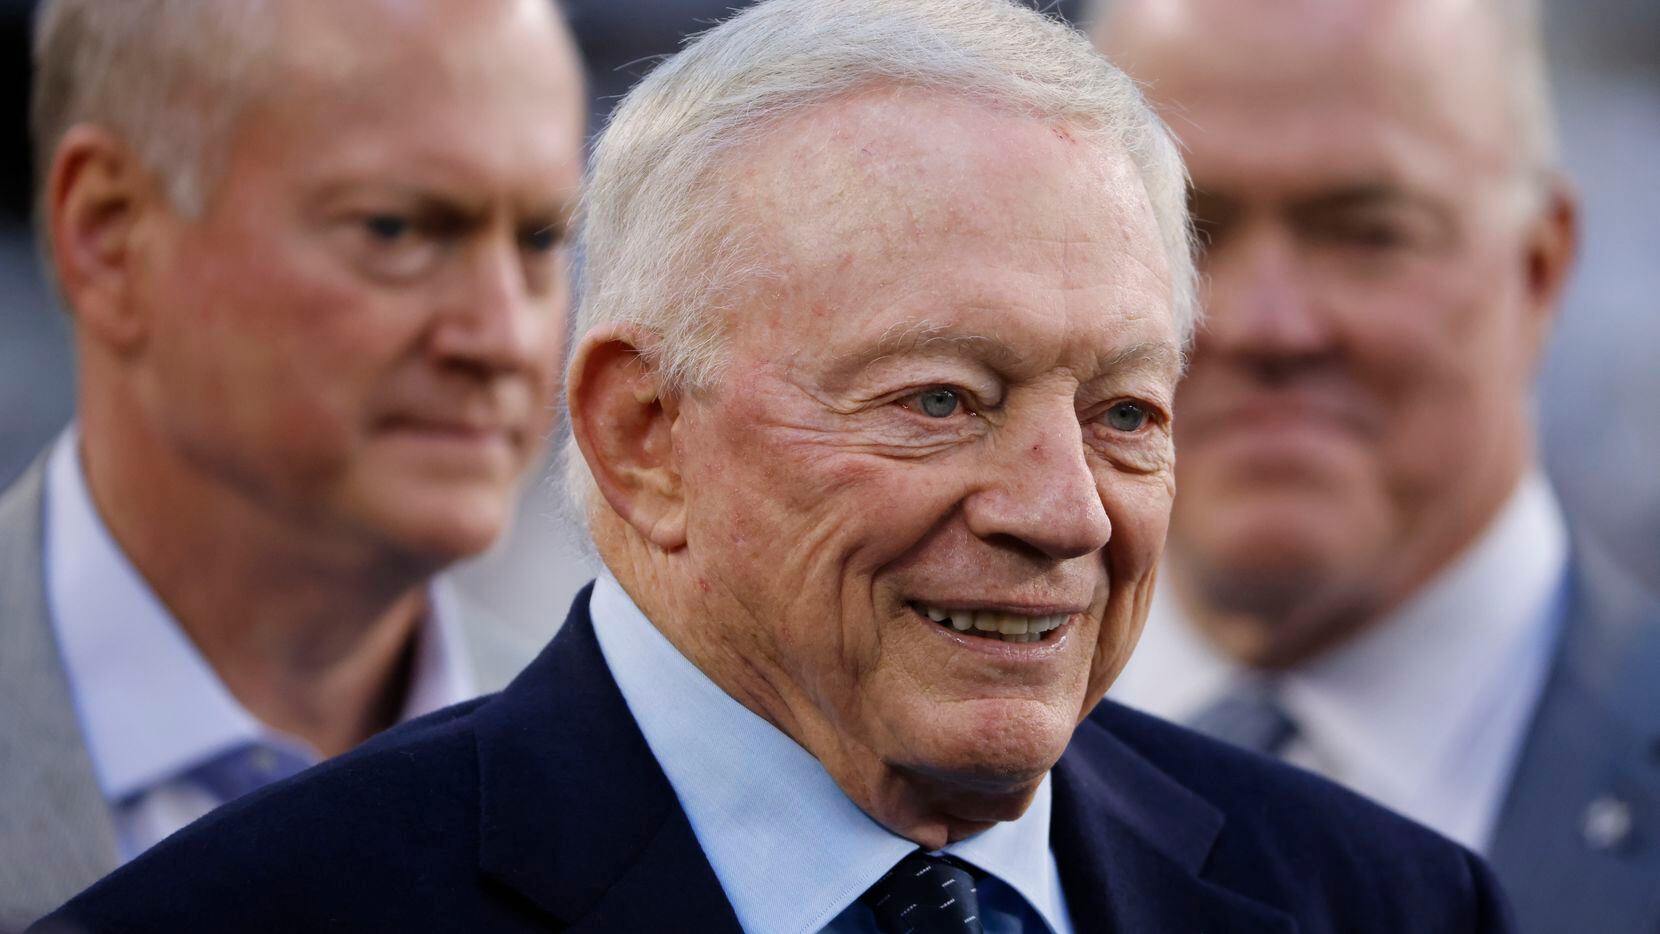 Dallas Cowboys owner Jerry Jones is seen with his sons Jerry Jr. and Steven before an NFL...